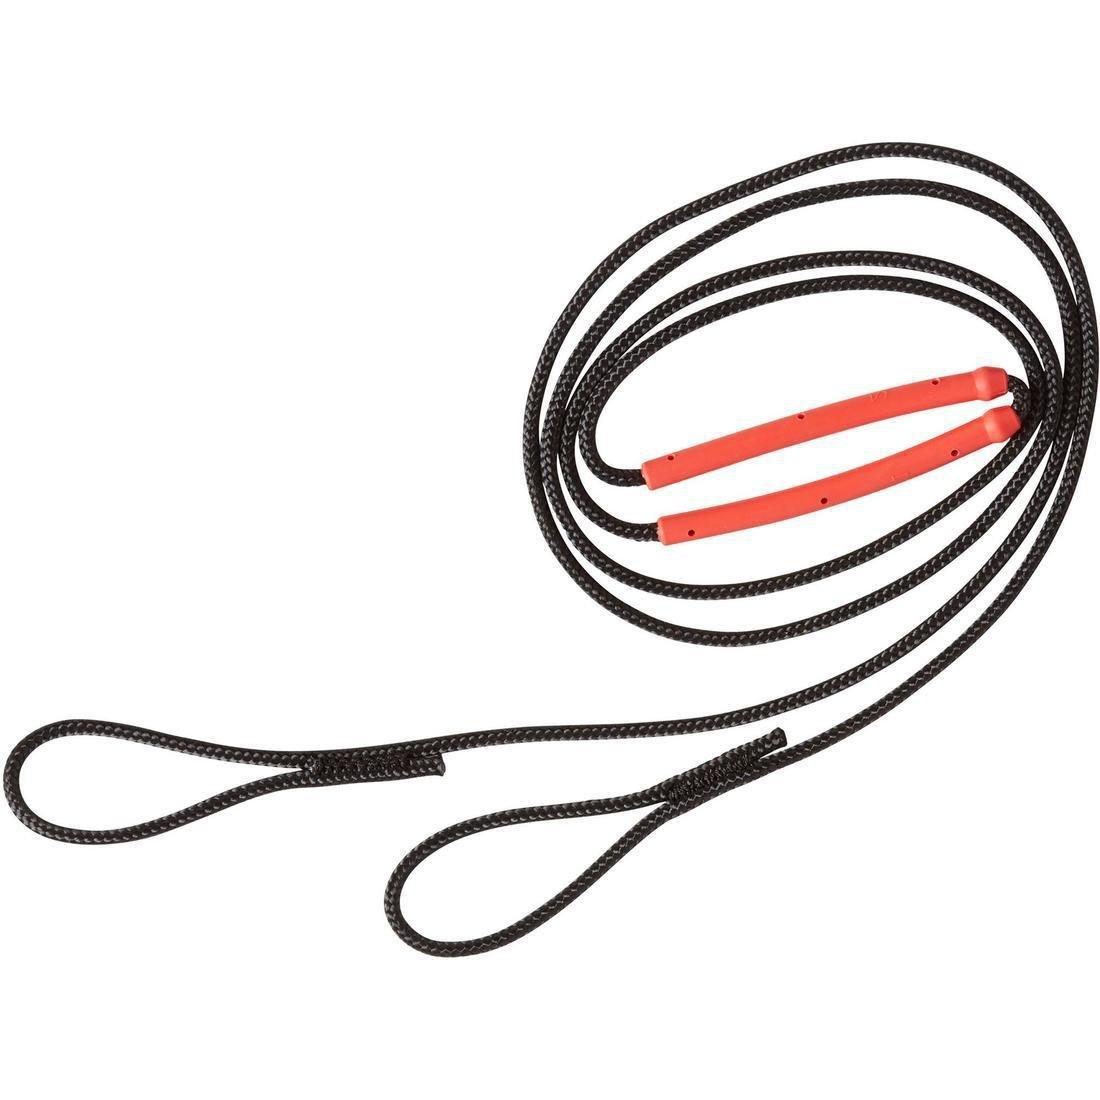 GEOLOGIC - Junior Bowstring Discovery, Red